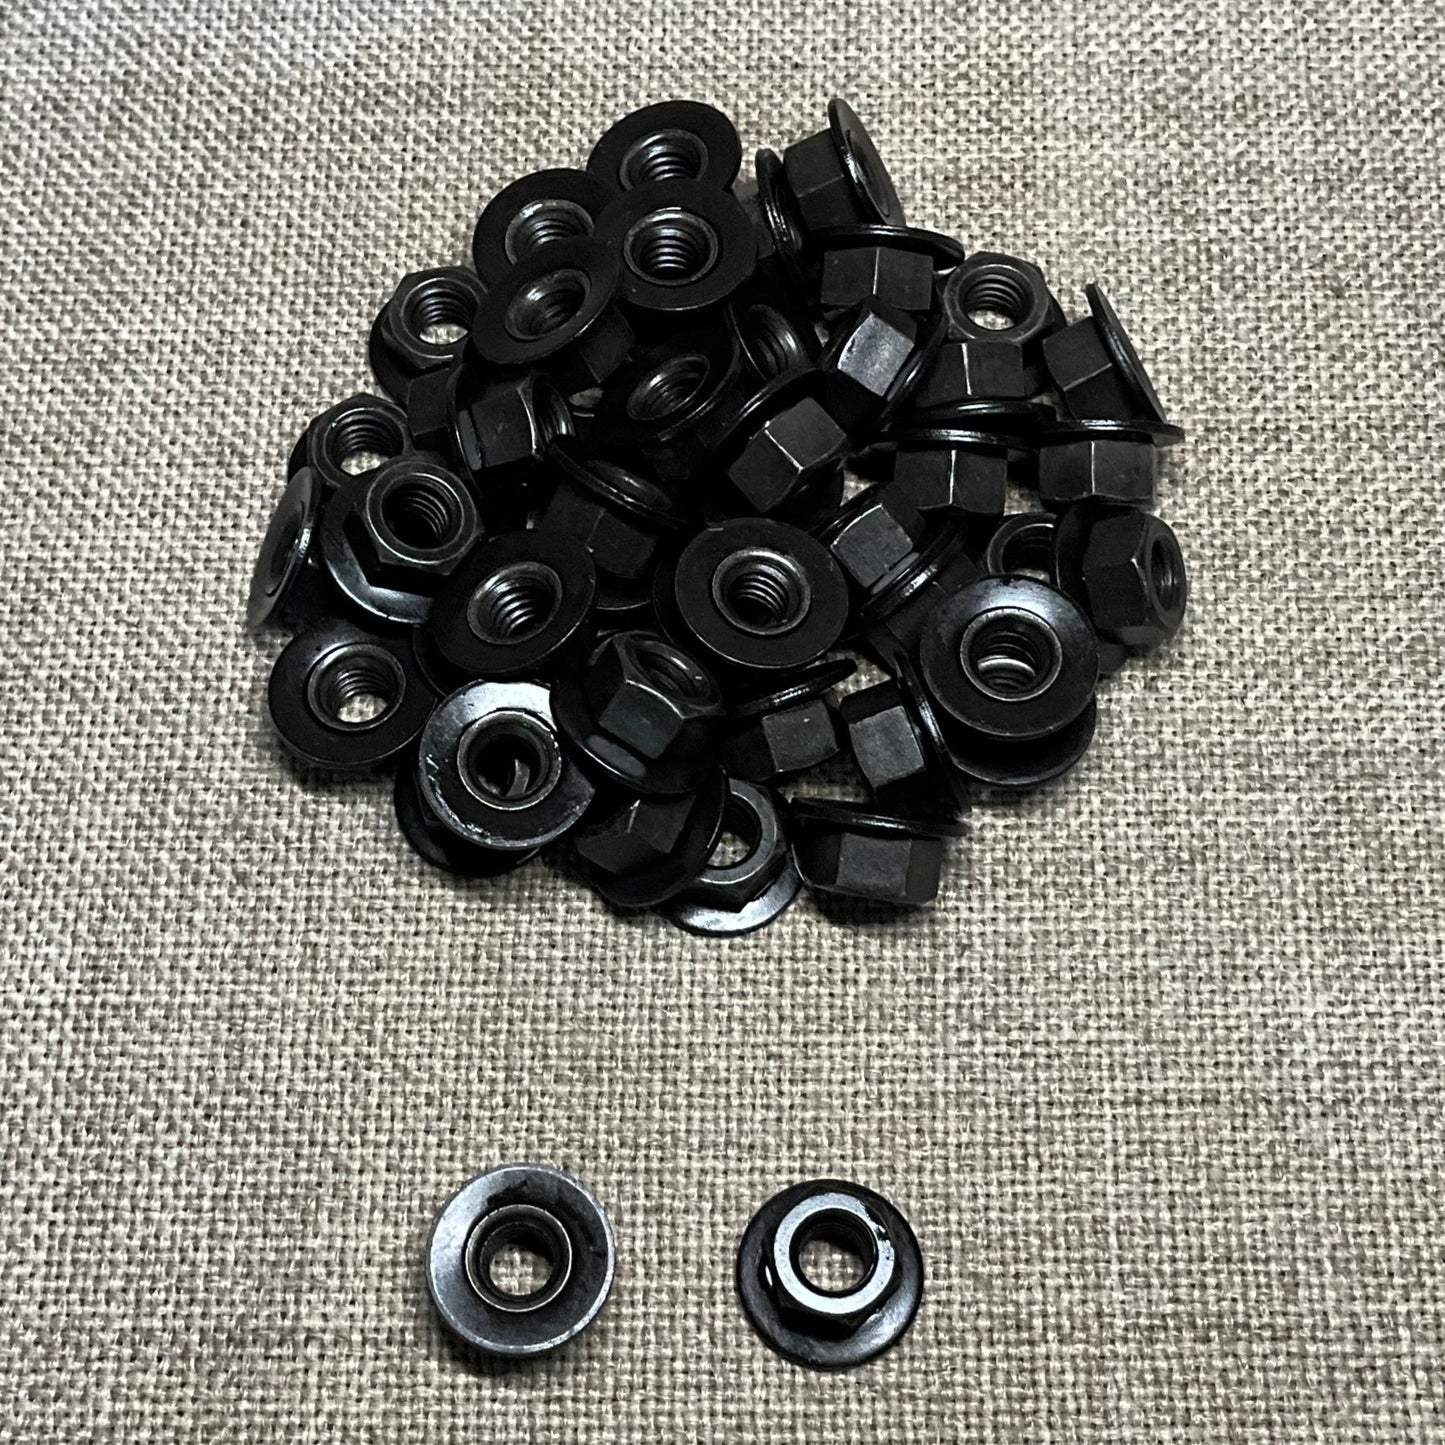 50 Free Spinning Washer Nuts Auveco 15350 O.E.M. 6025007 Automobile & General